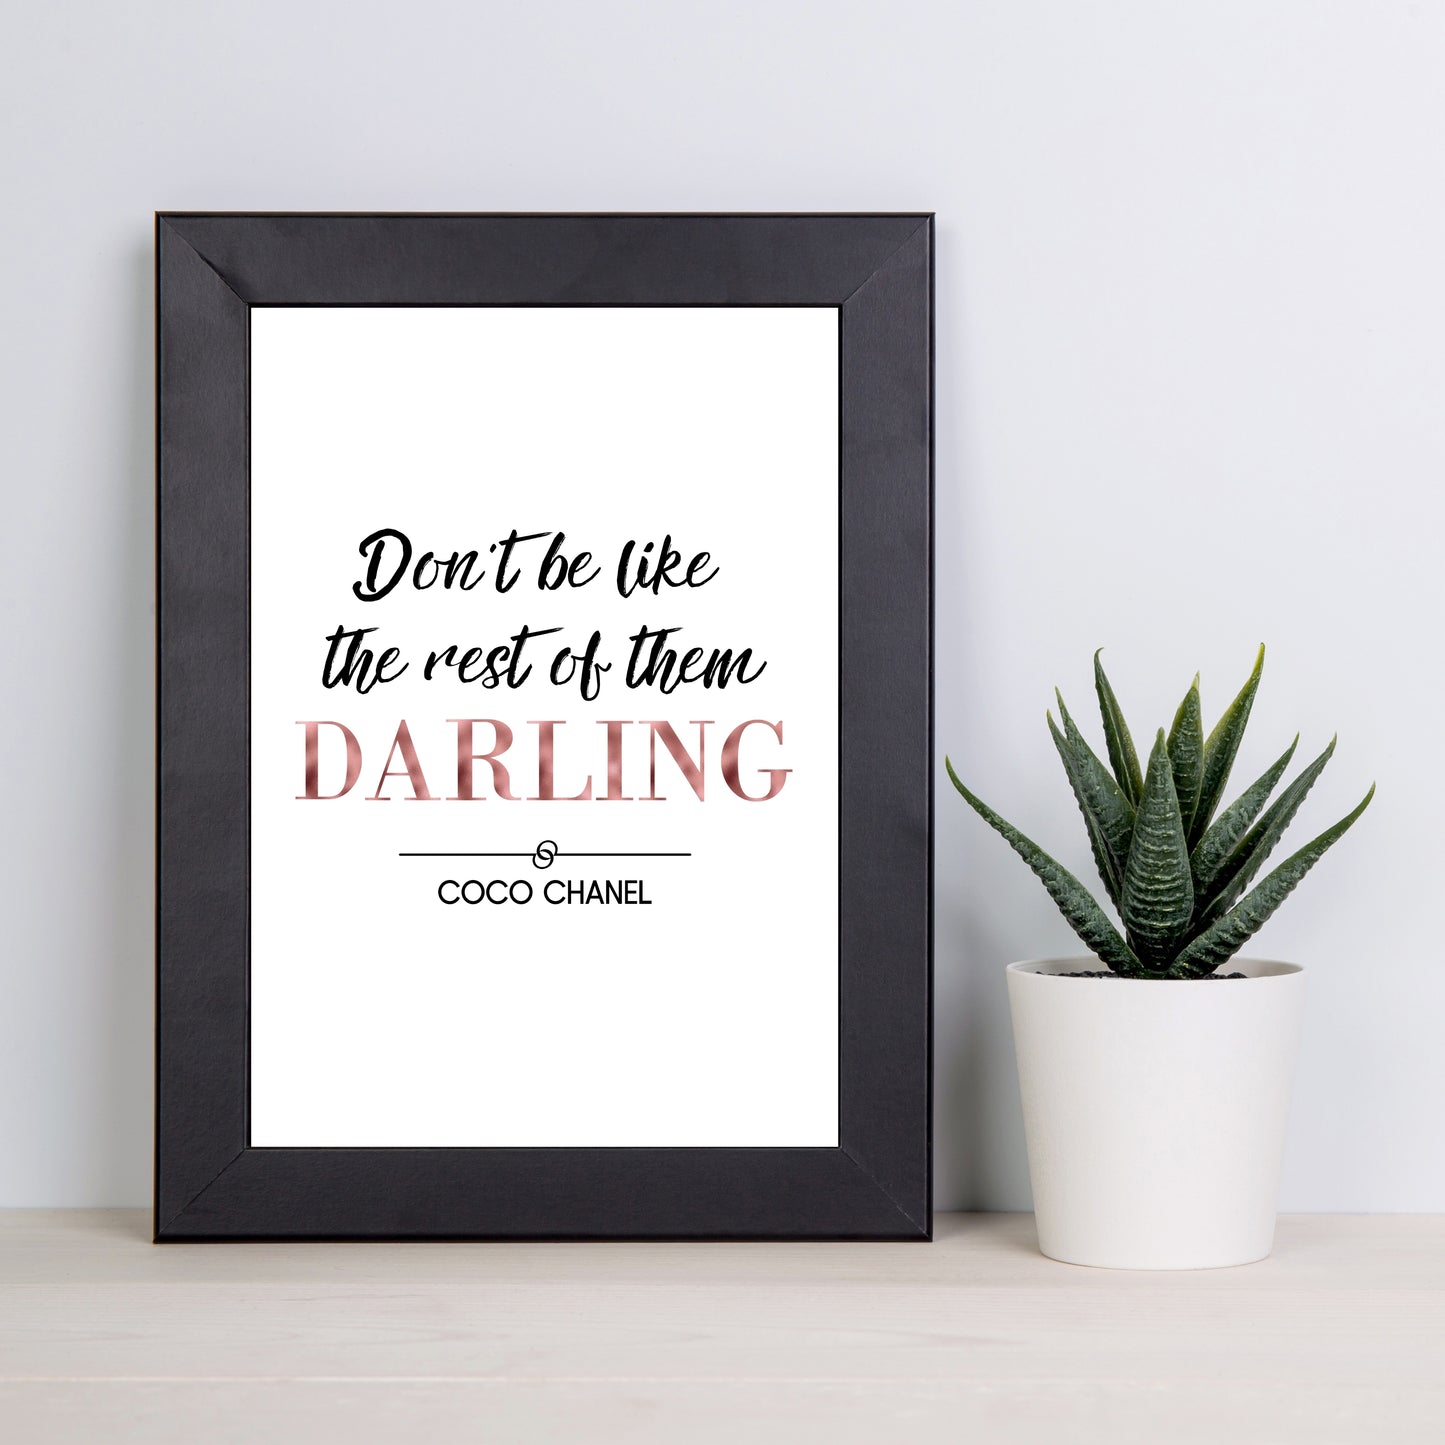 "Don't Be Like The Rest Of Them Darling," Famous Quote by Coco Chanel In Rose Gold, Printable Art